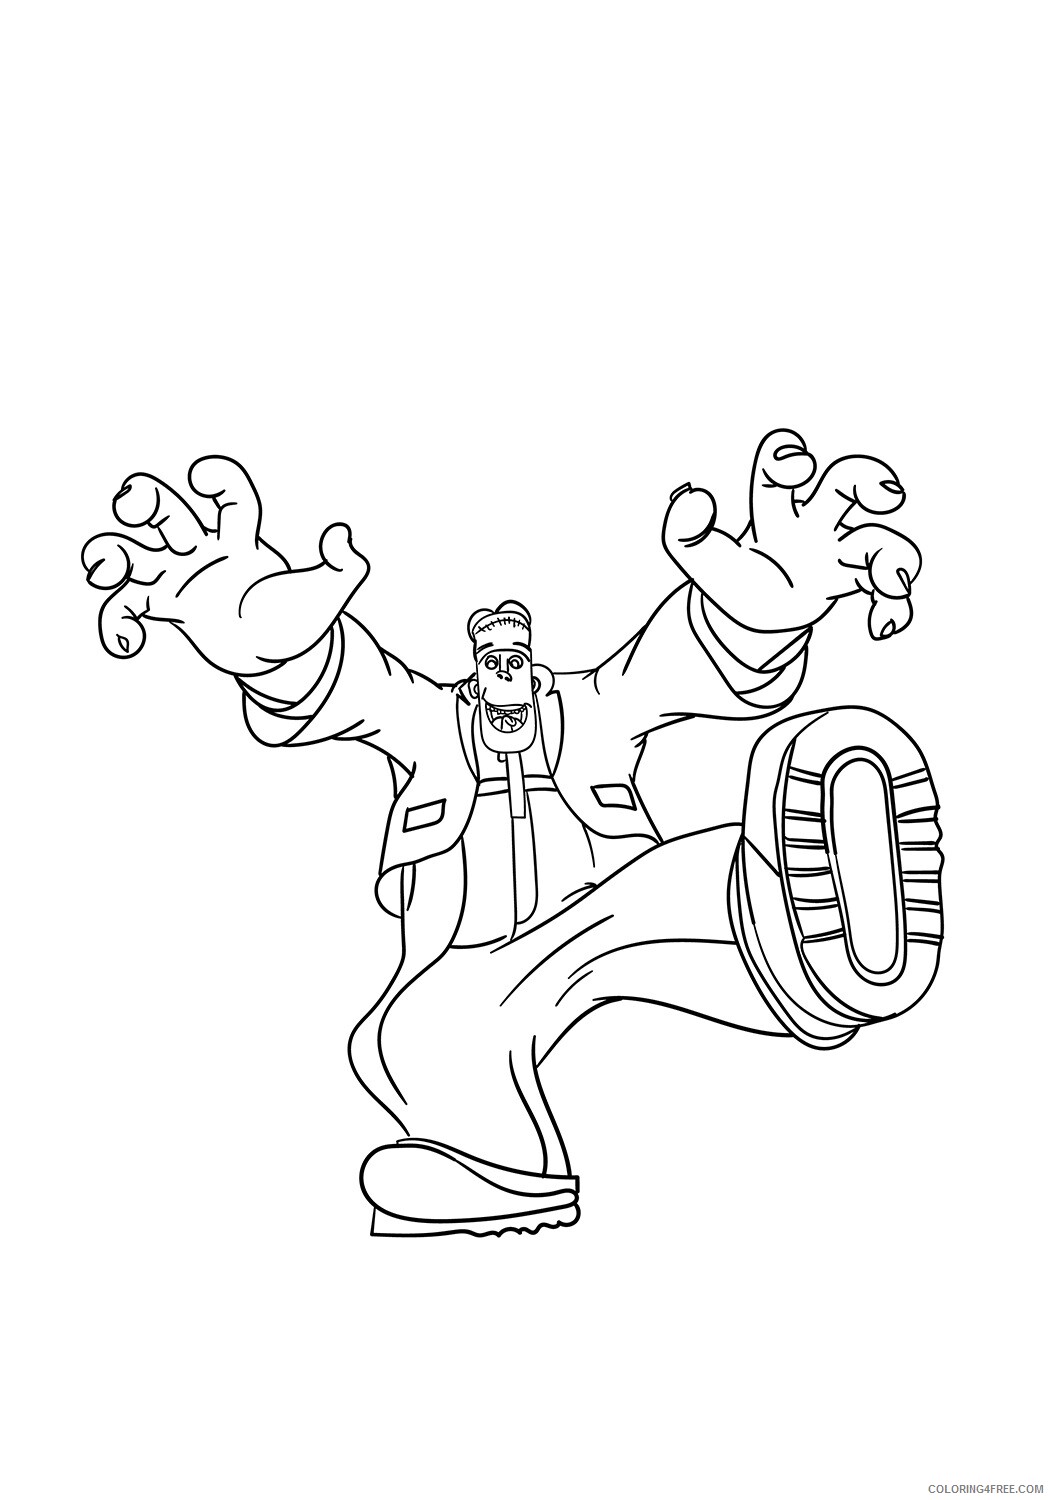 Frankenstein Coloring Pages for boys frankenstein 17 a4 Printable 2020 0445 Coloring4free